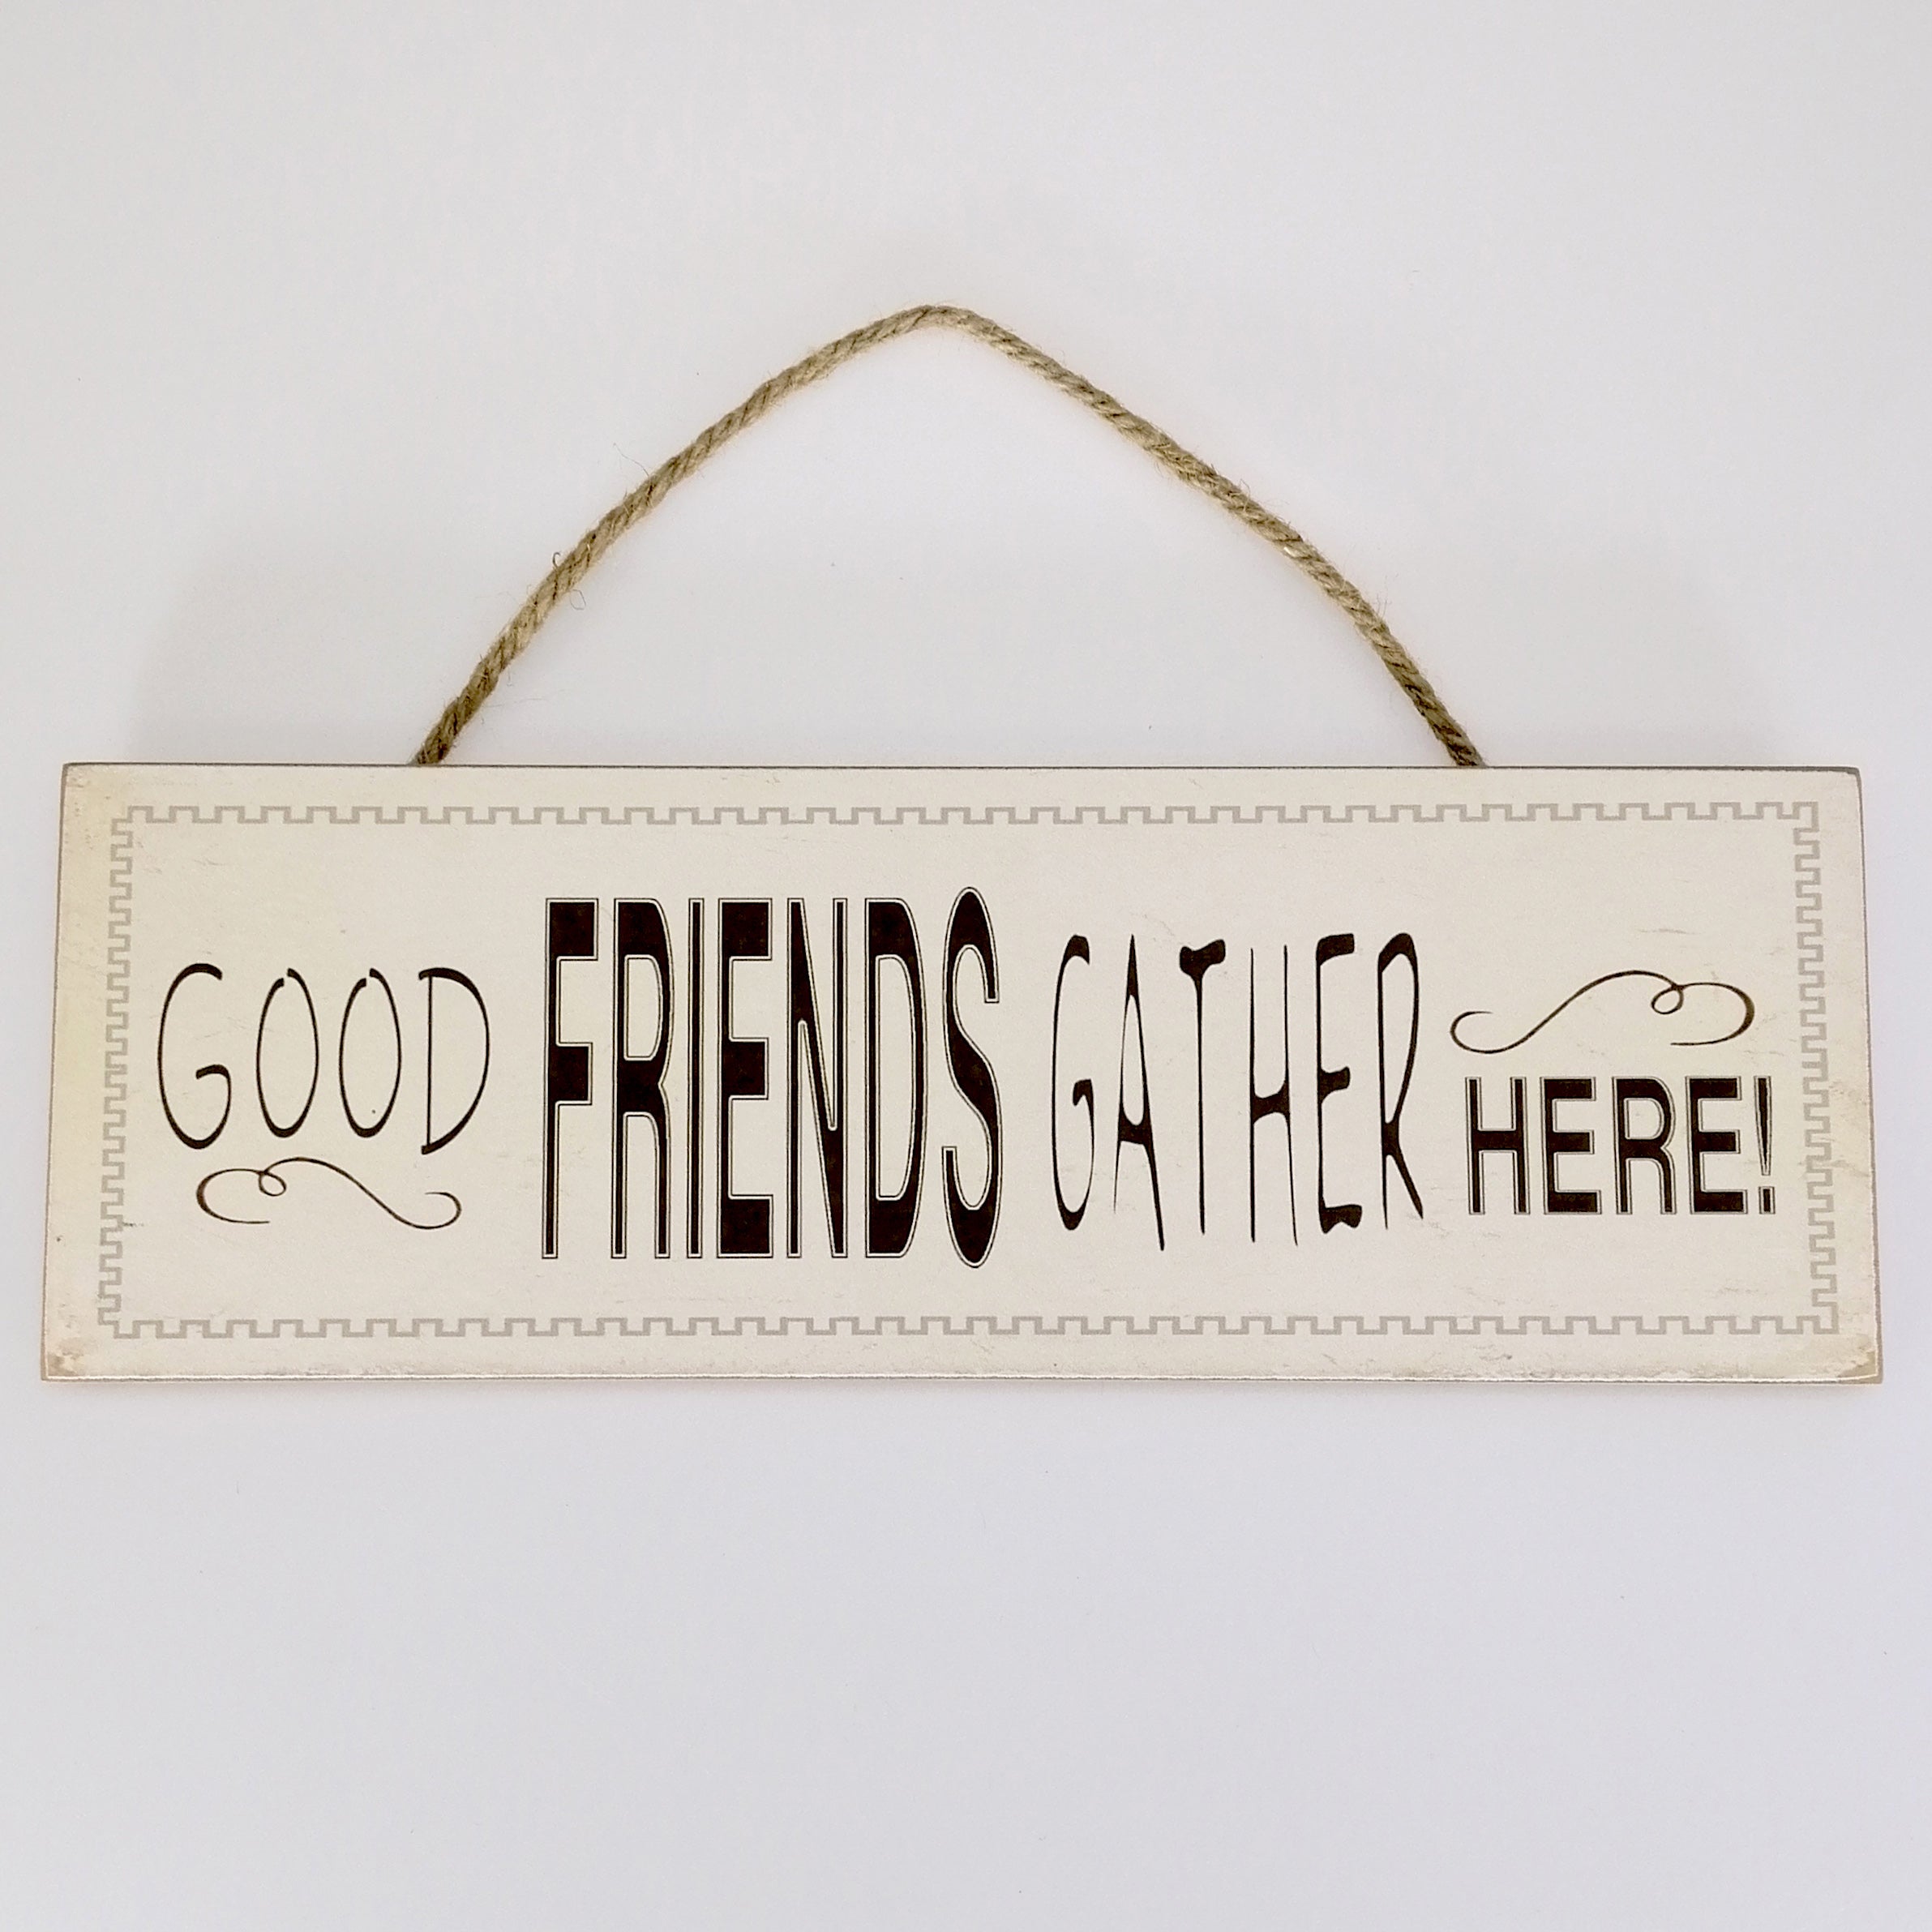 Good Friends Gather Here...' Plaque Sign